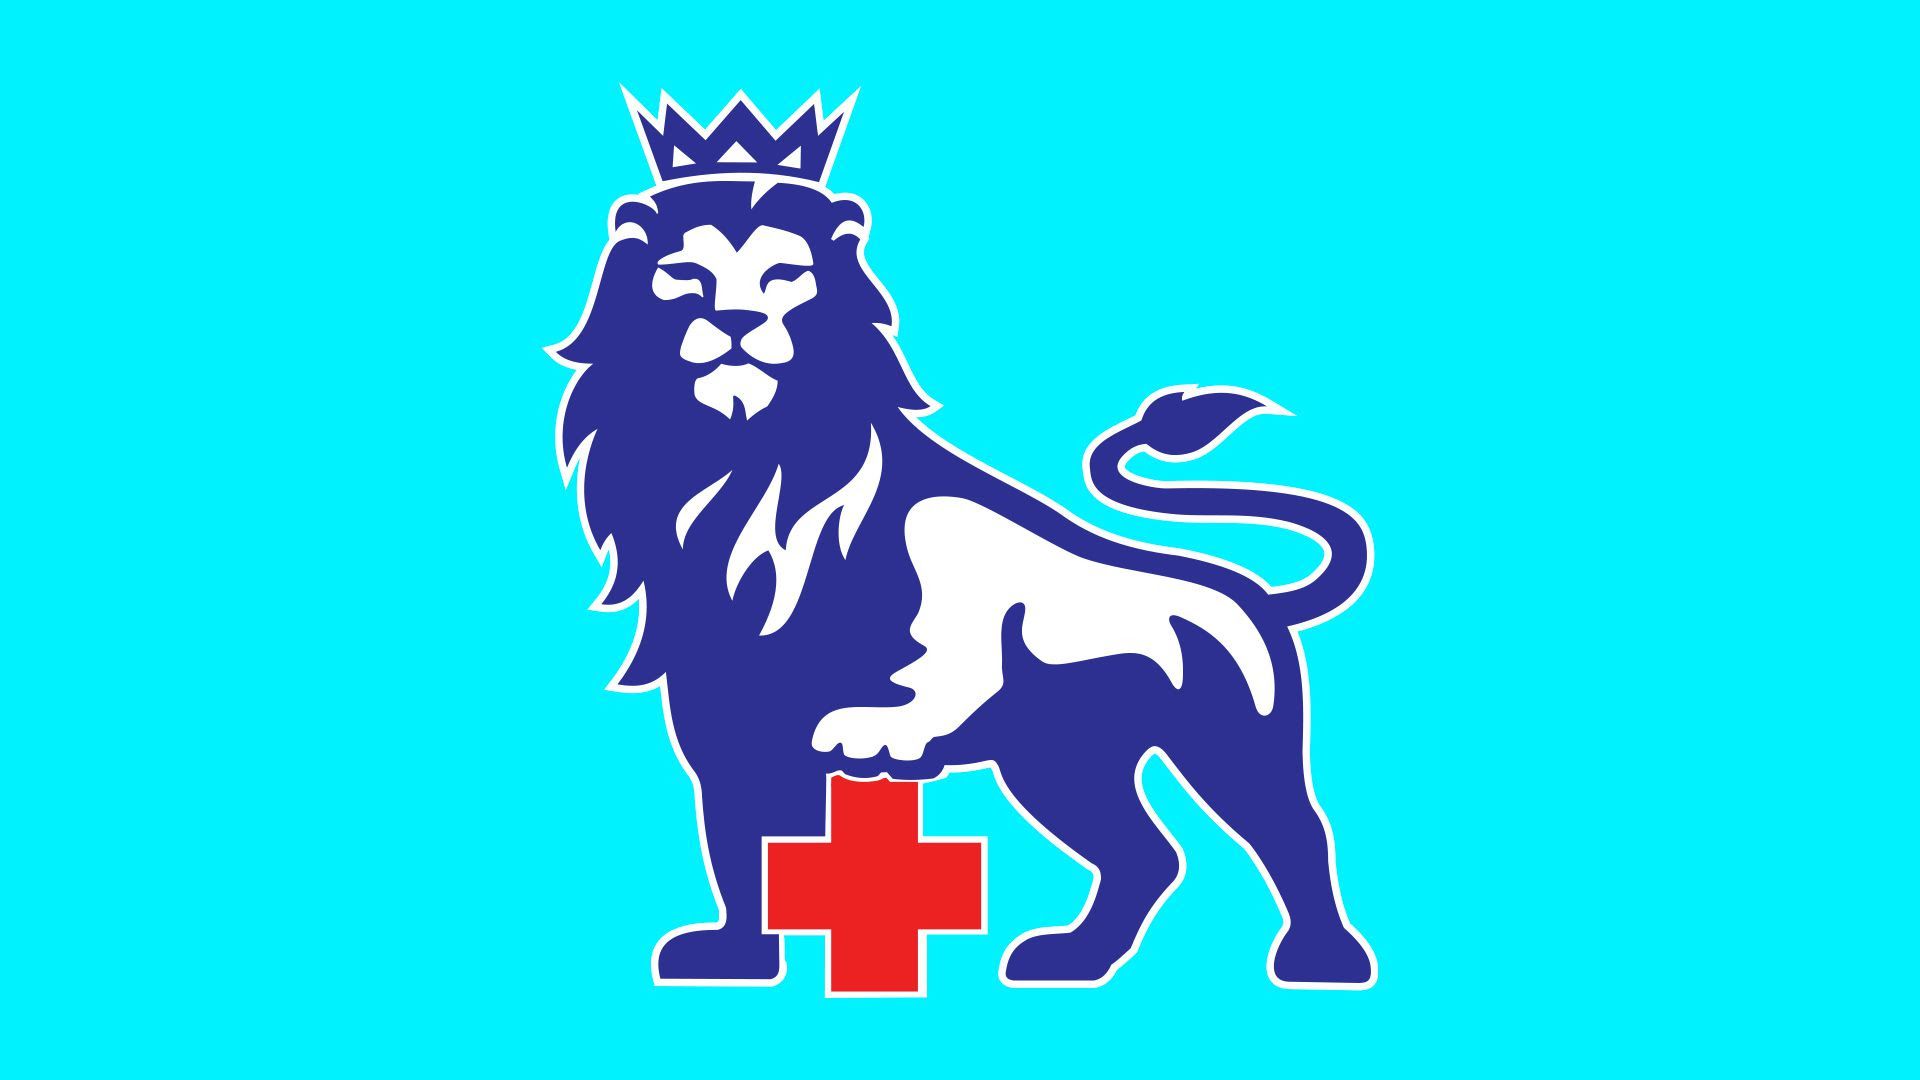 Illustration of the Premier League lion with a medical symbol